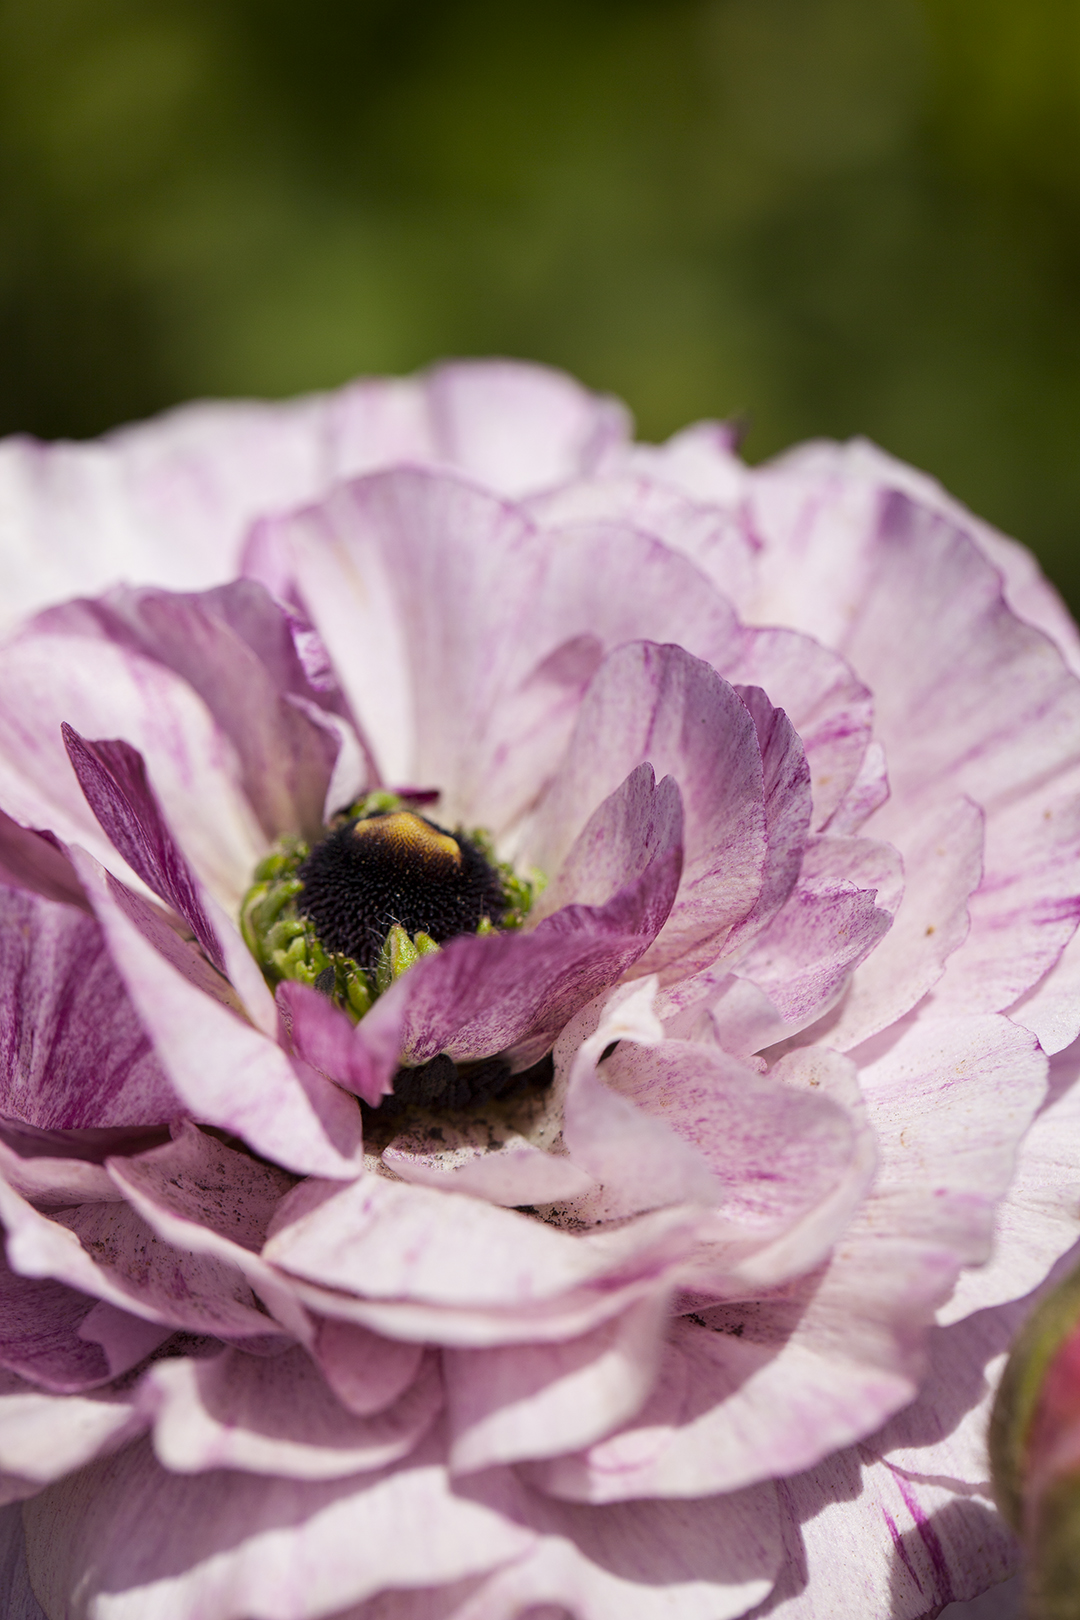 Bumble bee in the center of flower petals